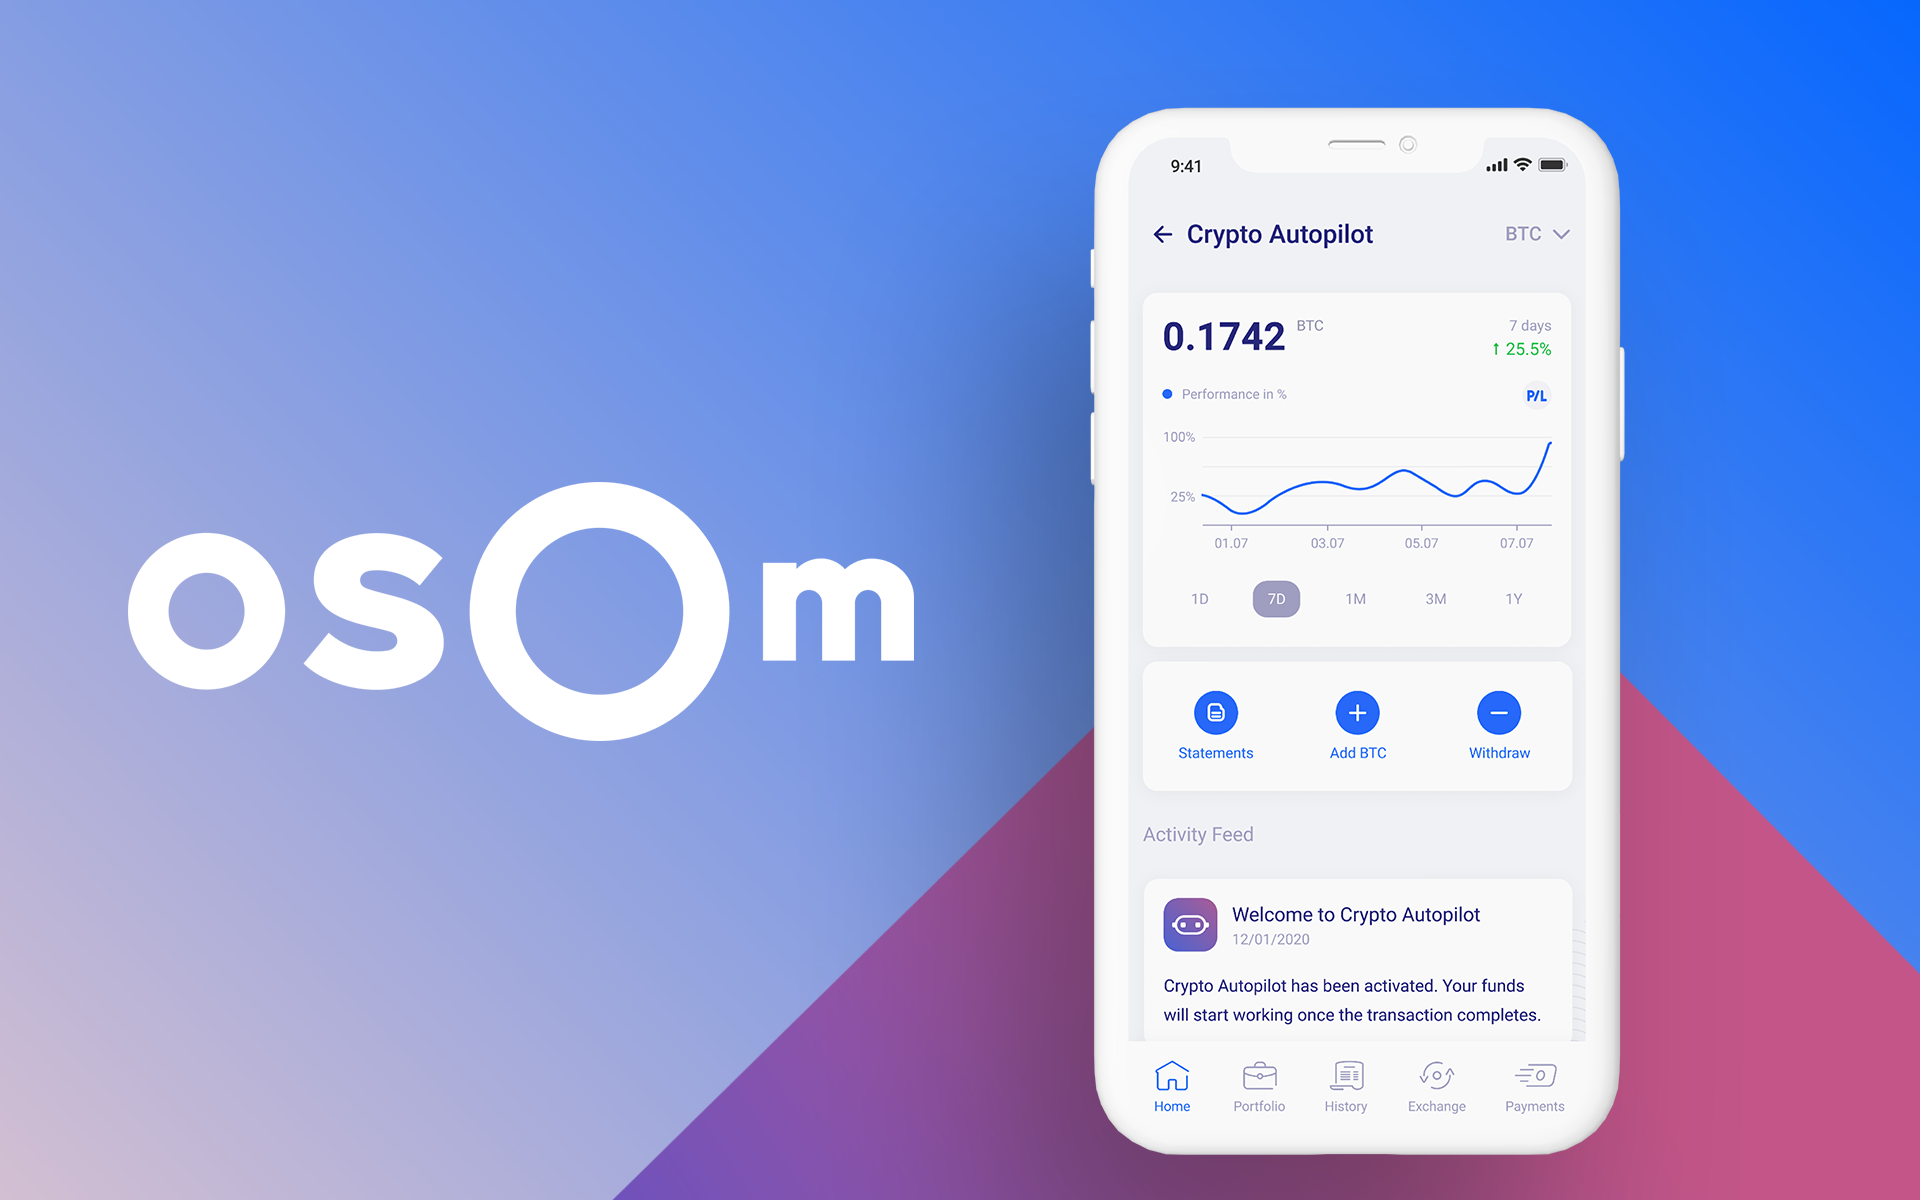 Take The Guesswork Out Of Bitcoin With AI-Powered Crypto Autopilot By OSOM